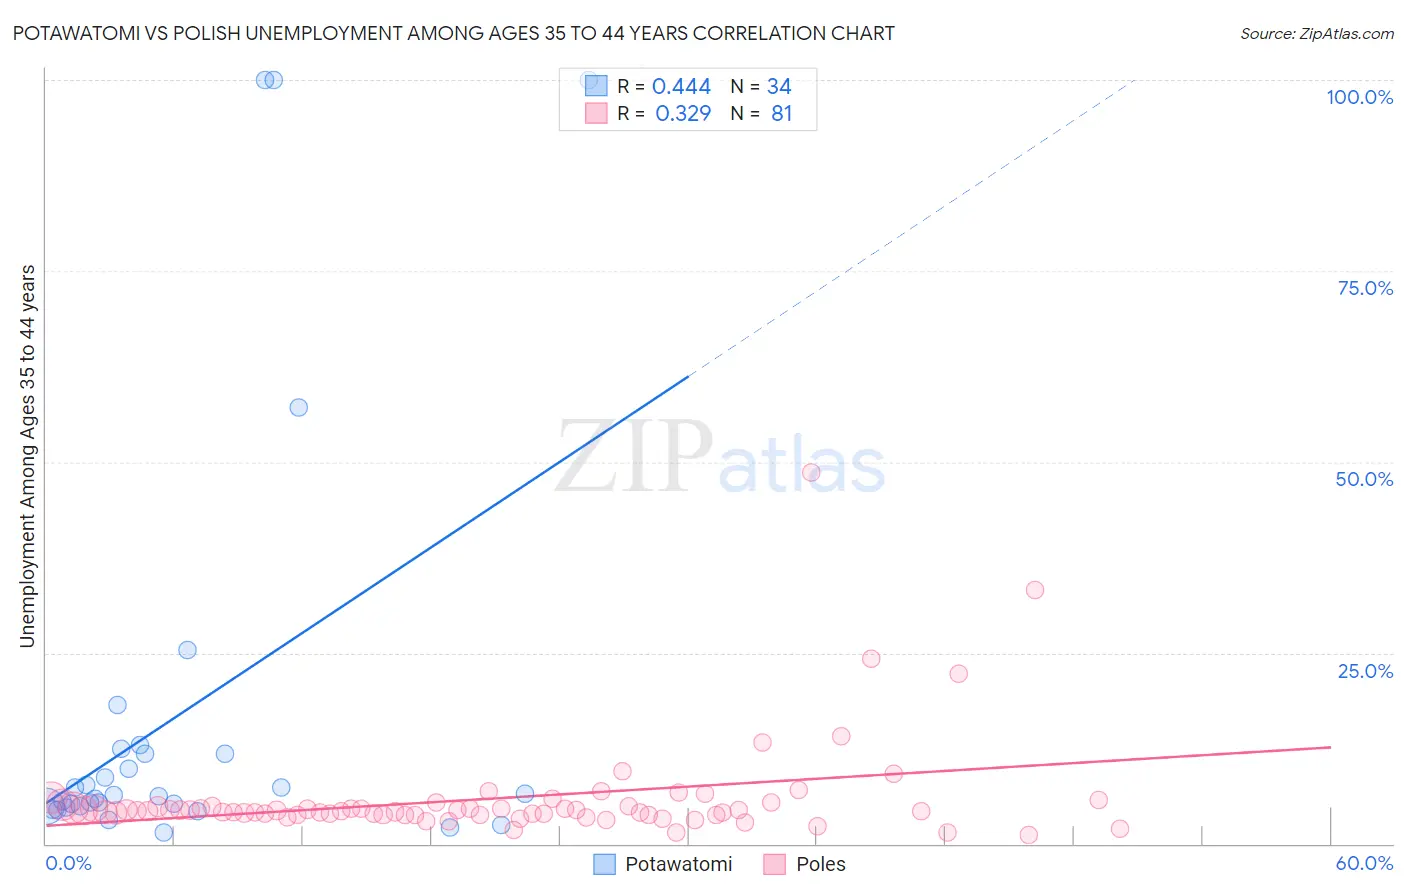 Potawatomi vs Polish Unemployment Among Ages 35 to 44 years